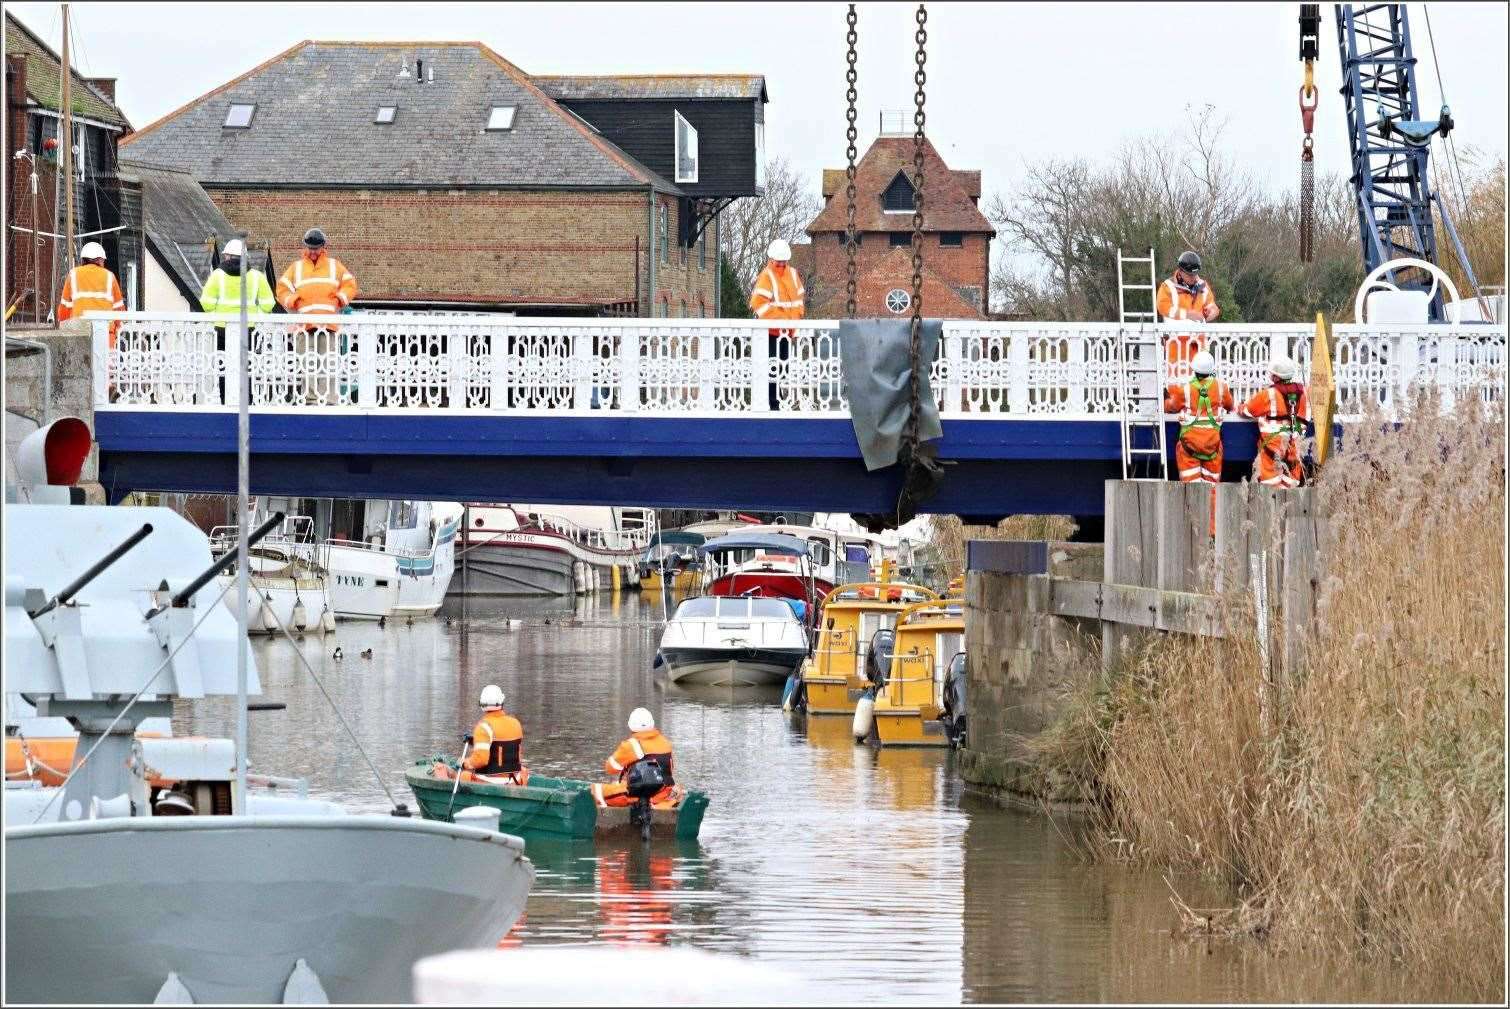 Contractors worked throughout Friday to reinstate the bridge over the River Stour. Picture: Lyn Groombridge